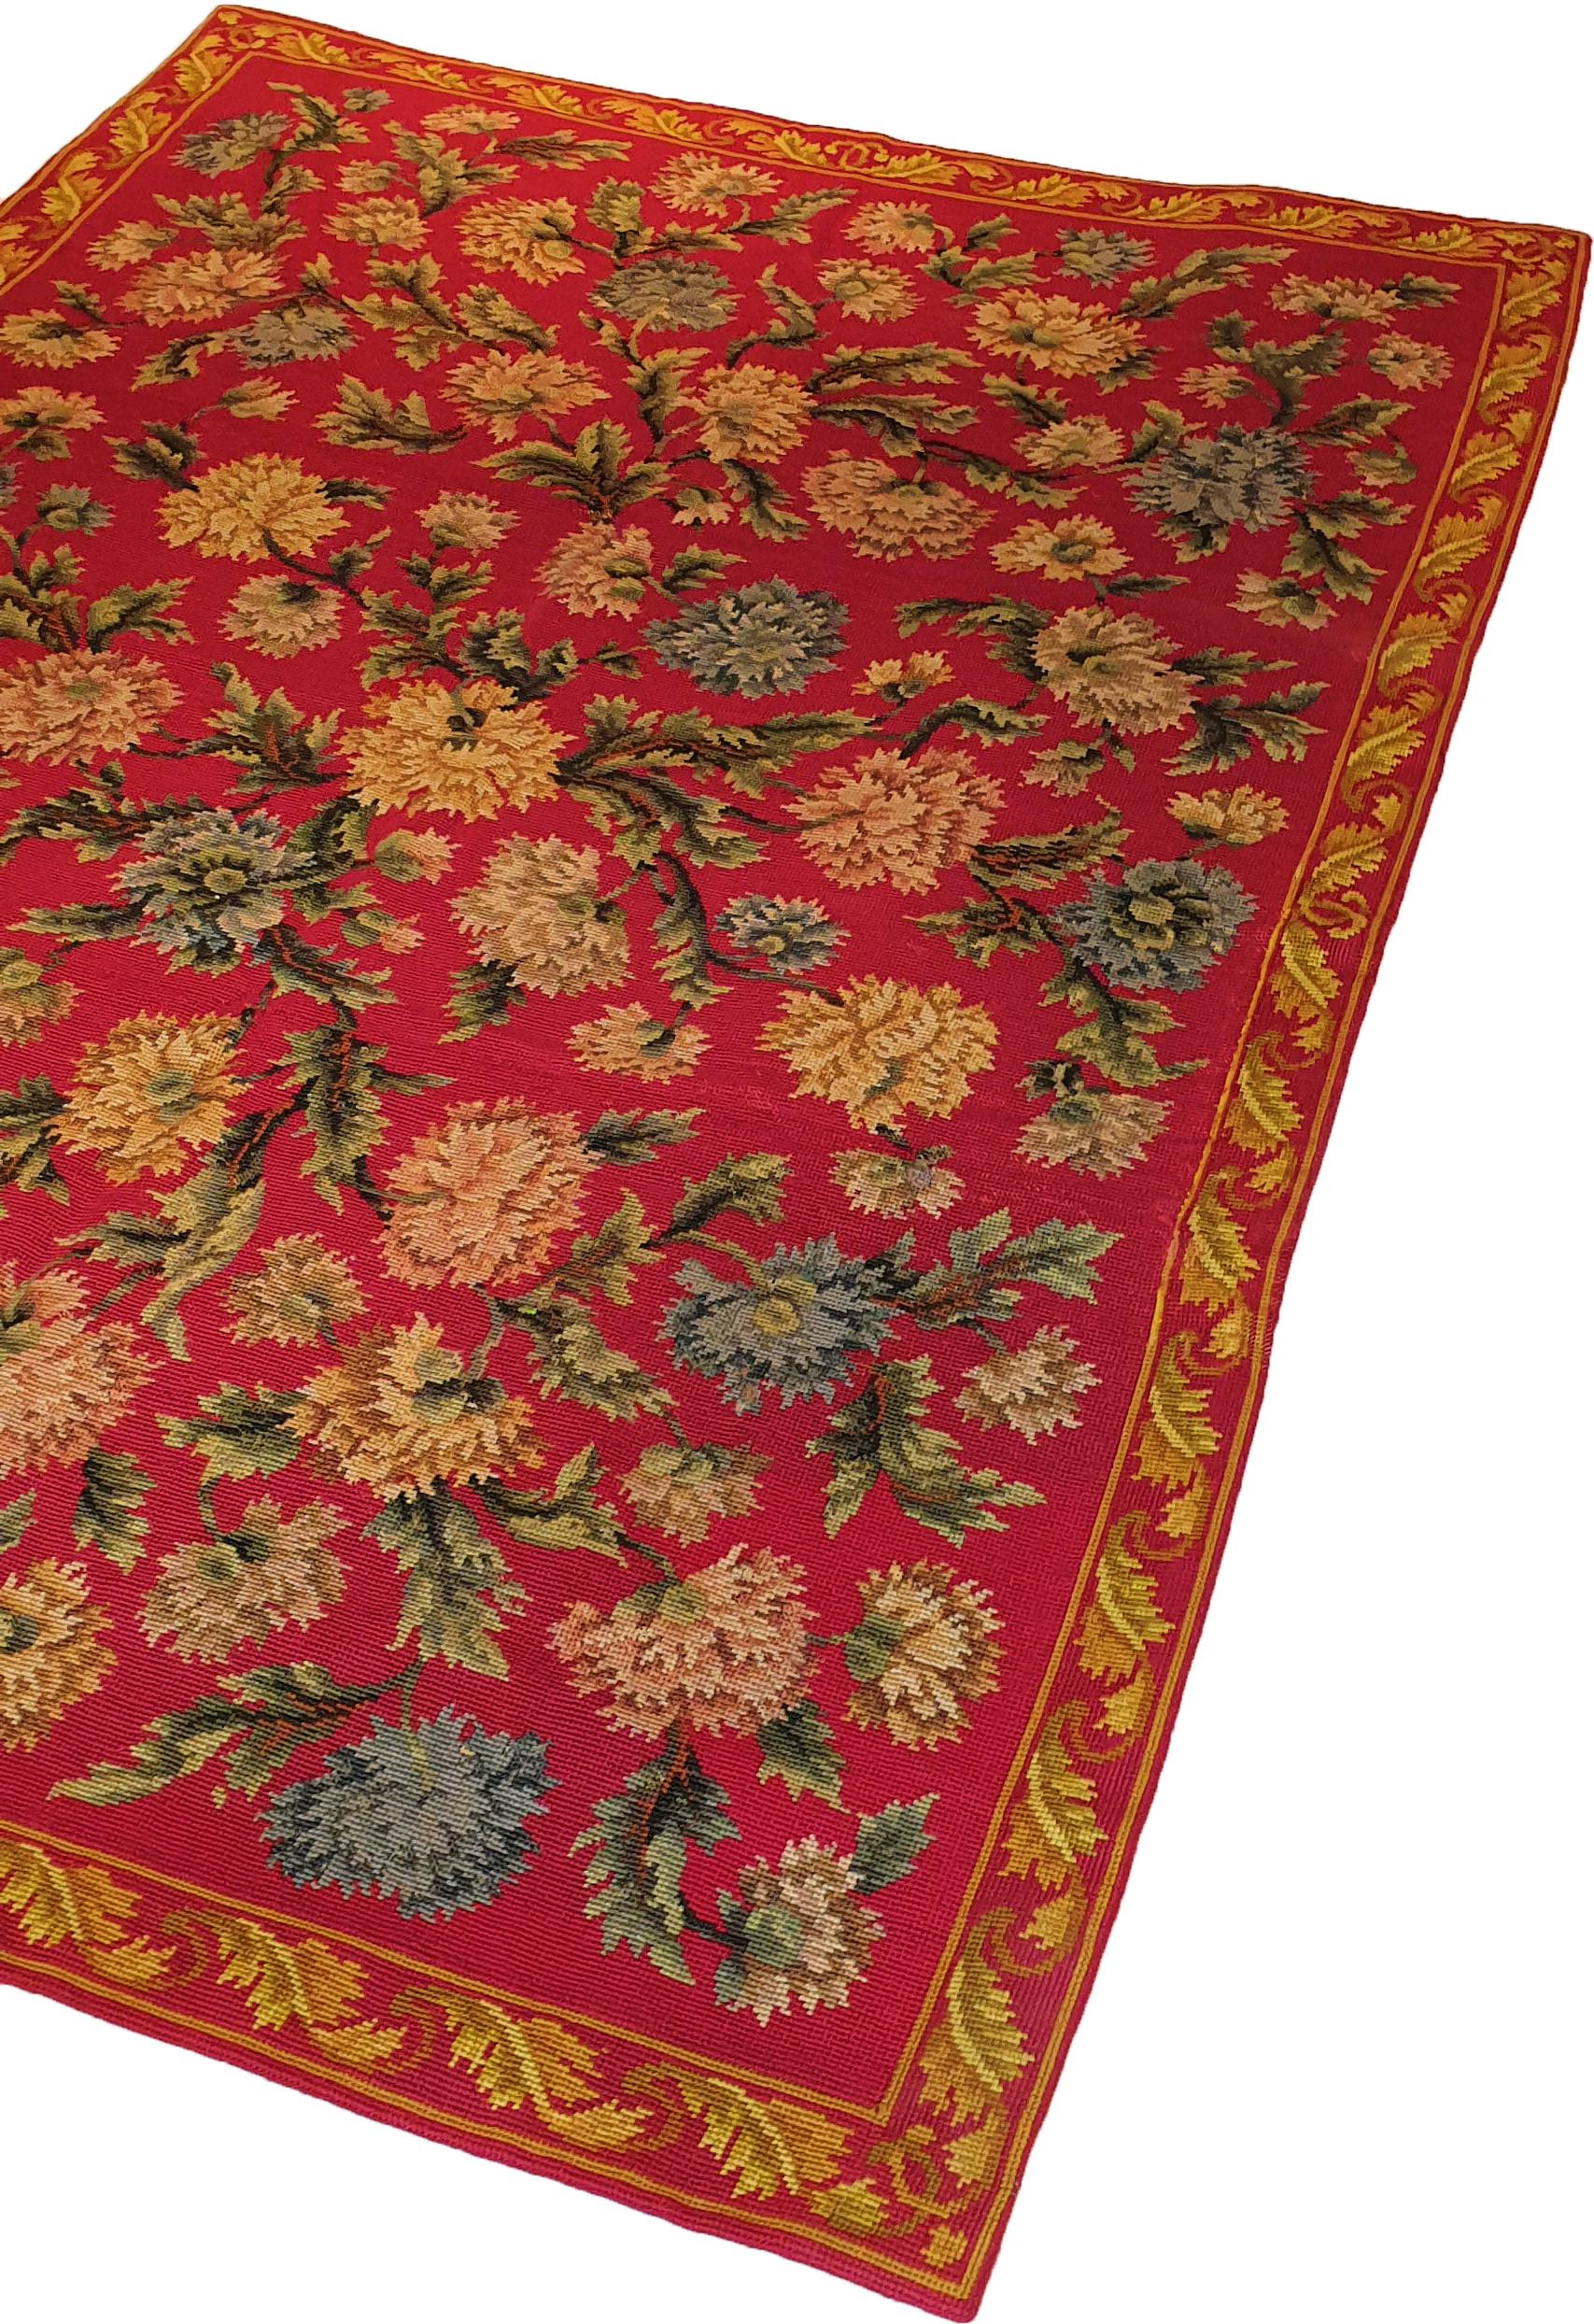 Aubusson 669 -  19th Century Needlepoint Rug Floral For Sale